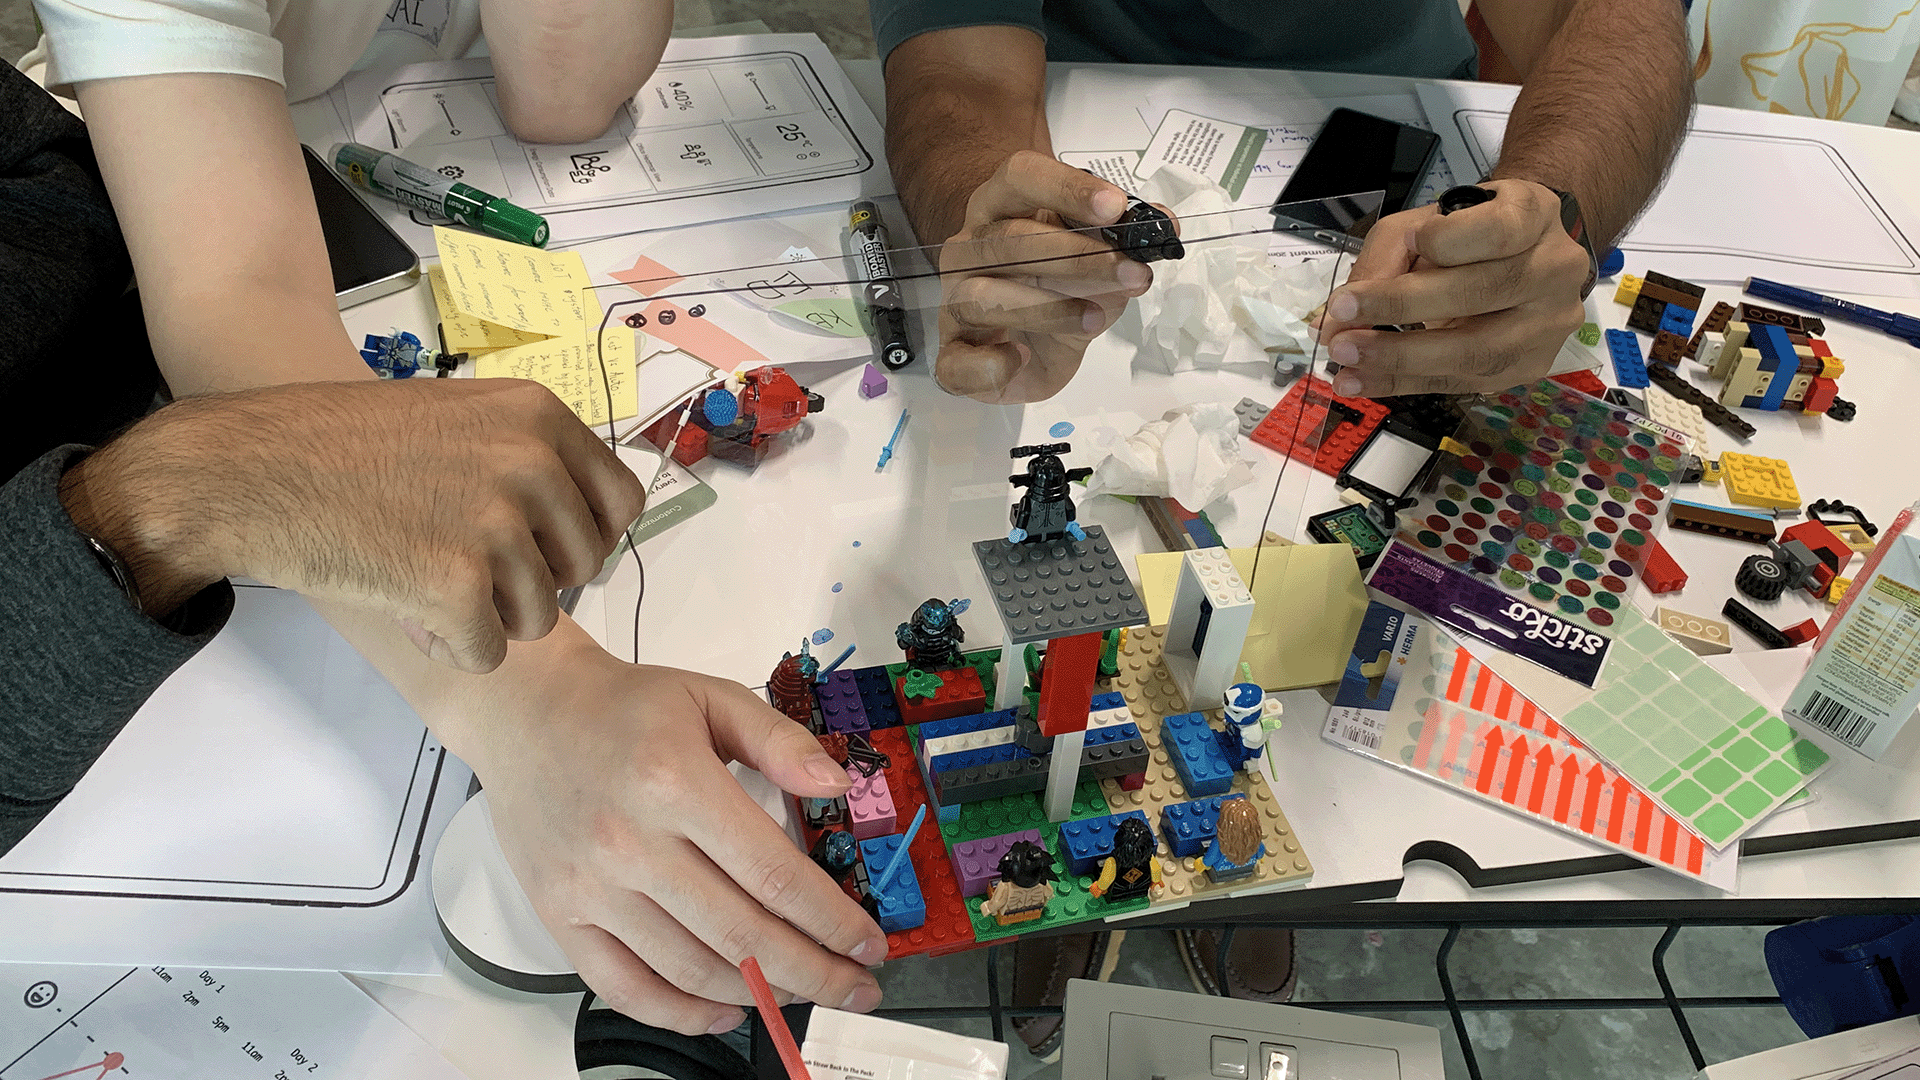 Use of Lego bricks providing a creative, fun and interactive way for workshop participants to explore their needs.